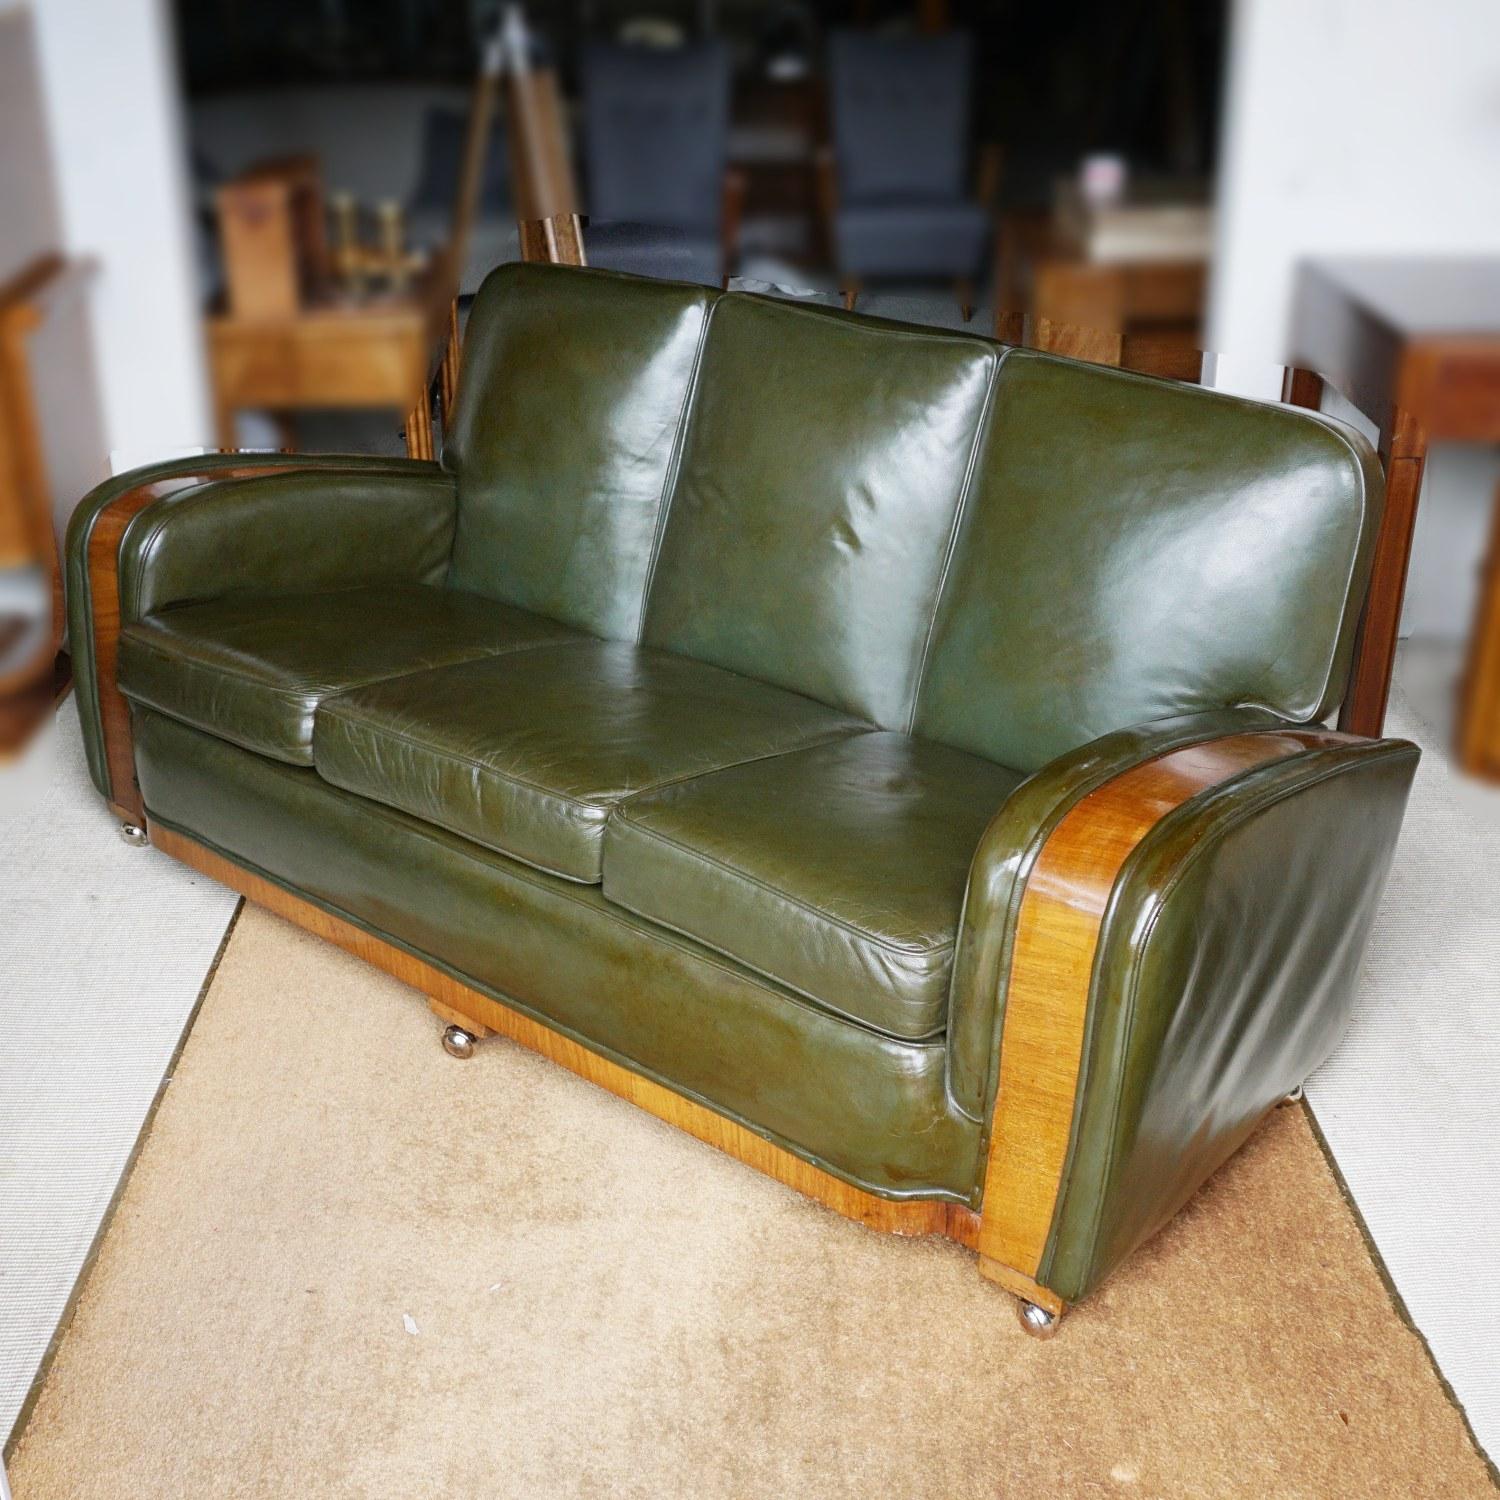 English Art Deco Tank Sofa Attributed to Heal's of London